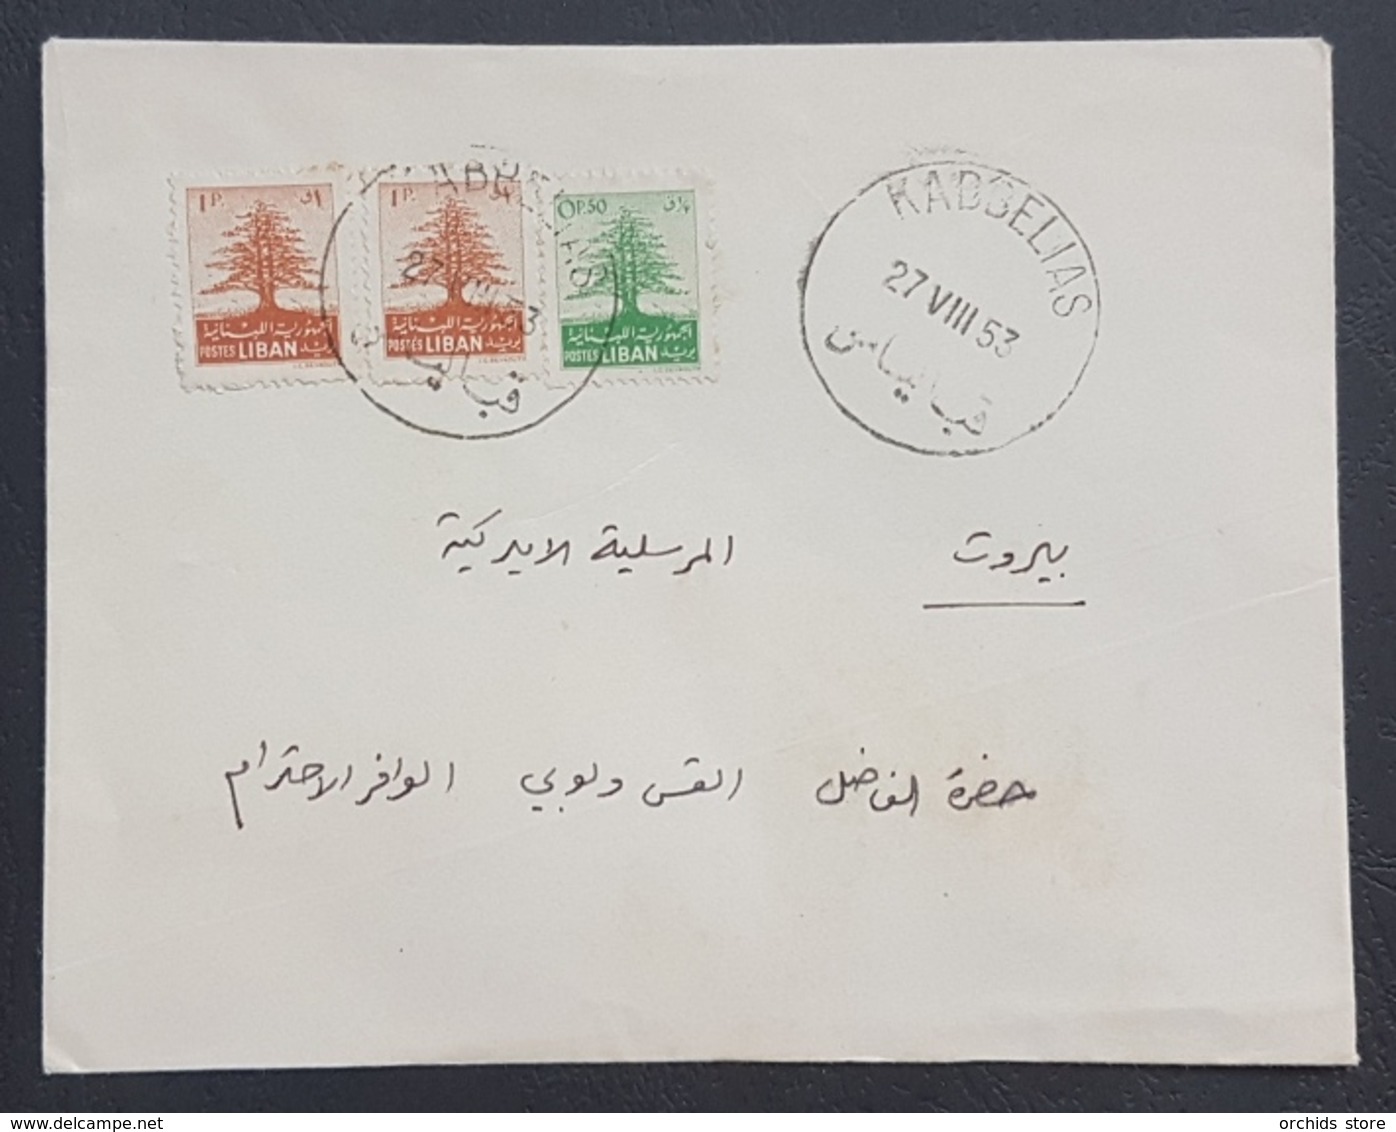 BL Lebanon Xtrmly Rare 1948 & 1950 Rare Cancels And Clear Strikes On Two Covers, 2 Types, "KAB ELIAS" Alphabets & "KABBE - Libanon